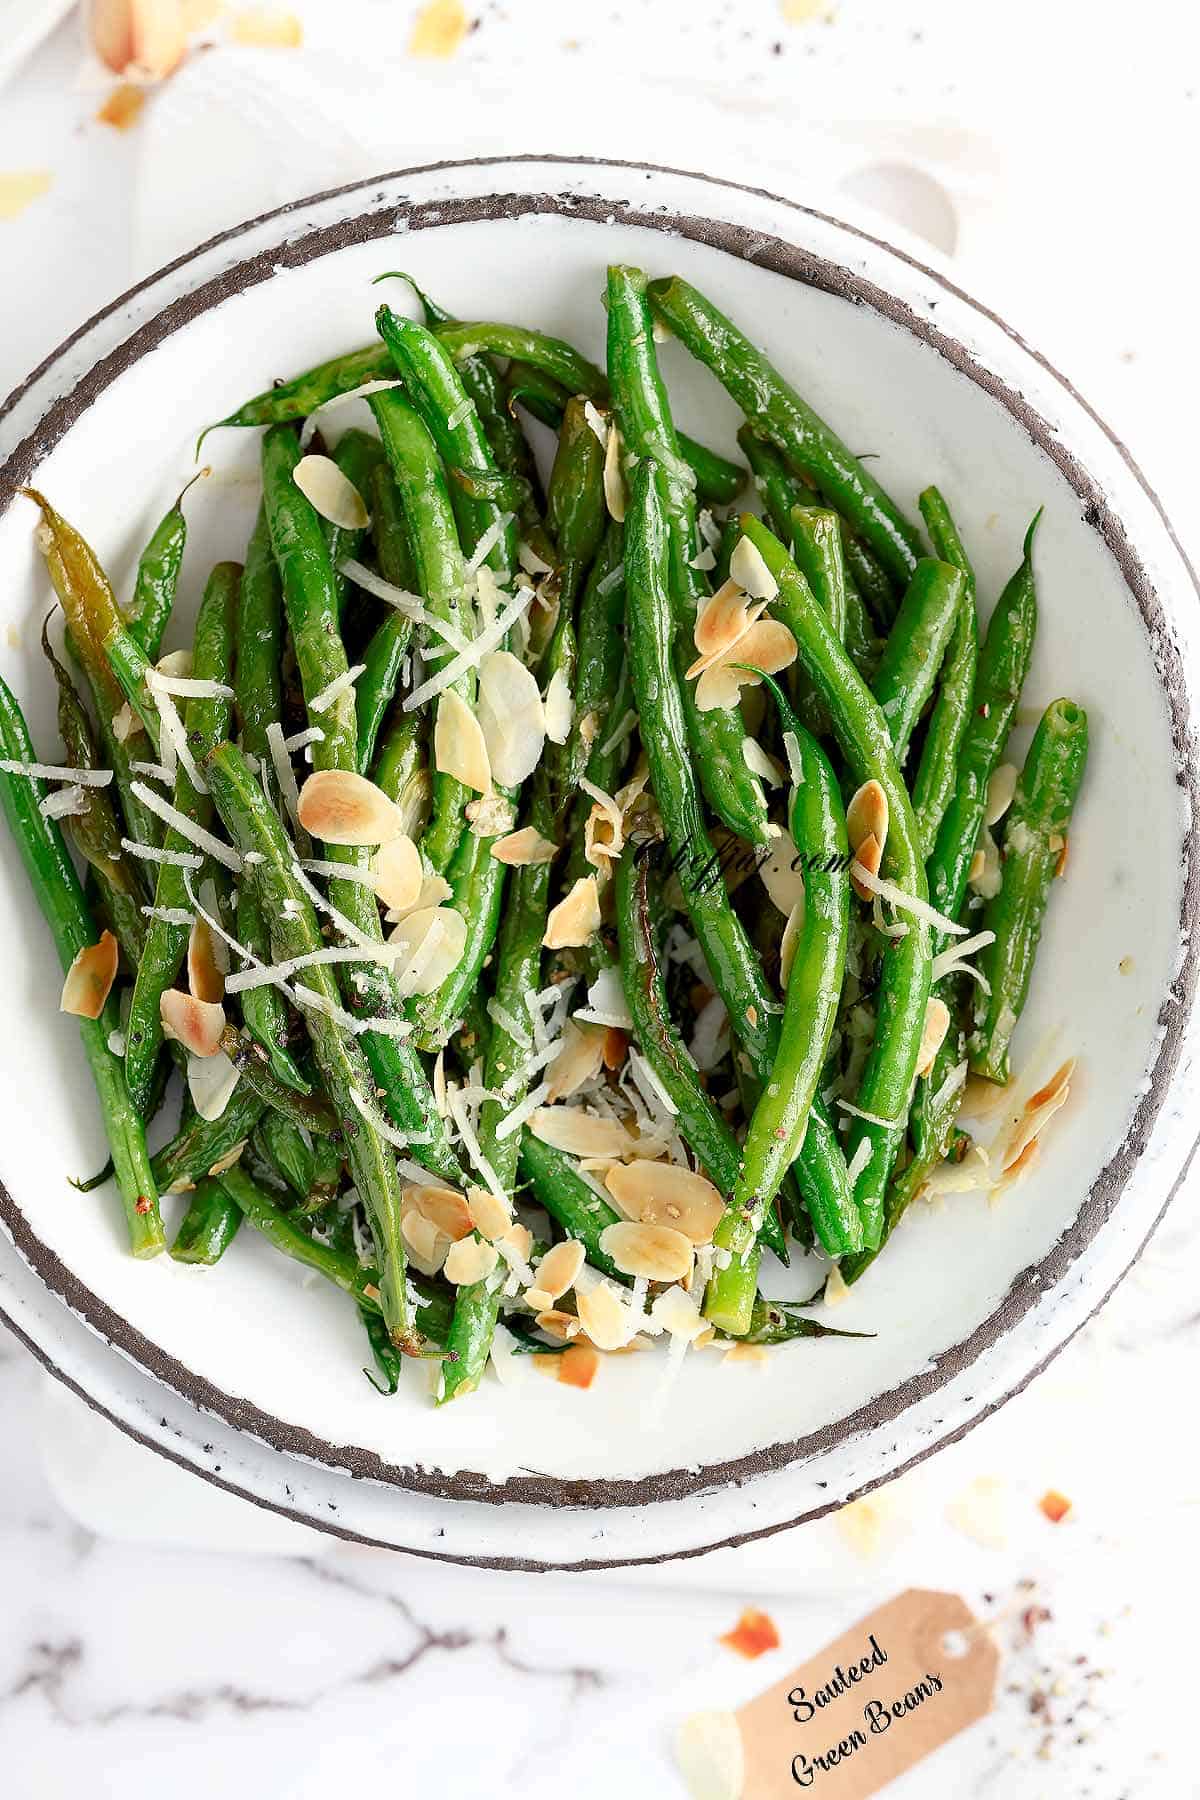 sauteed green beans with garlic